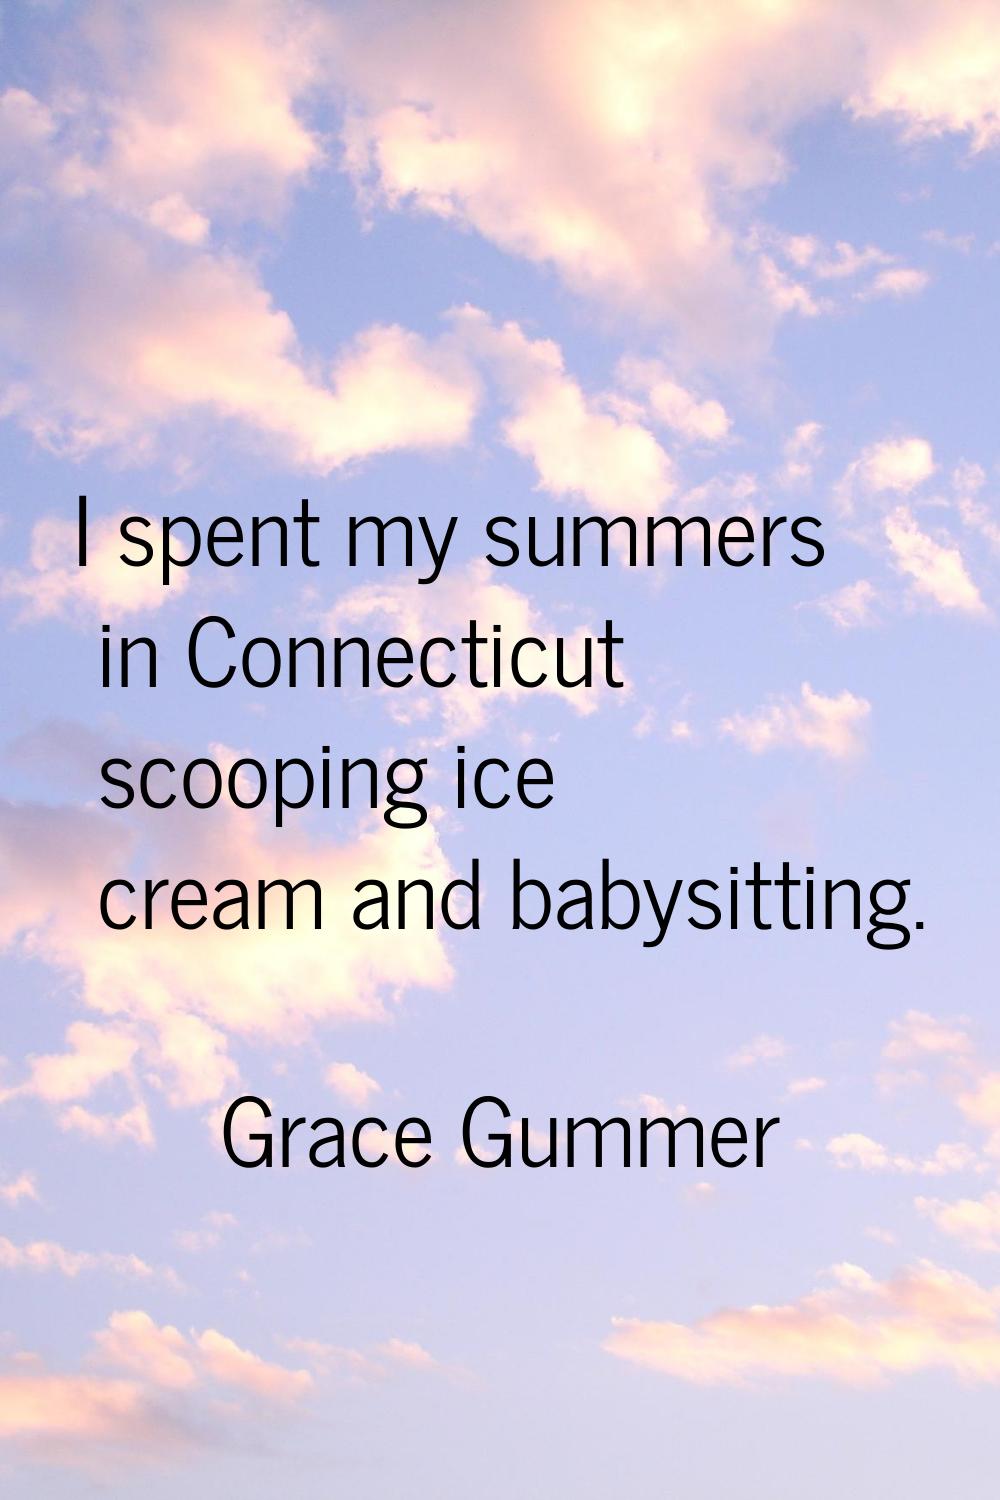 I spent my summers in Connecticut scooping ice cream and babysitting.